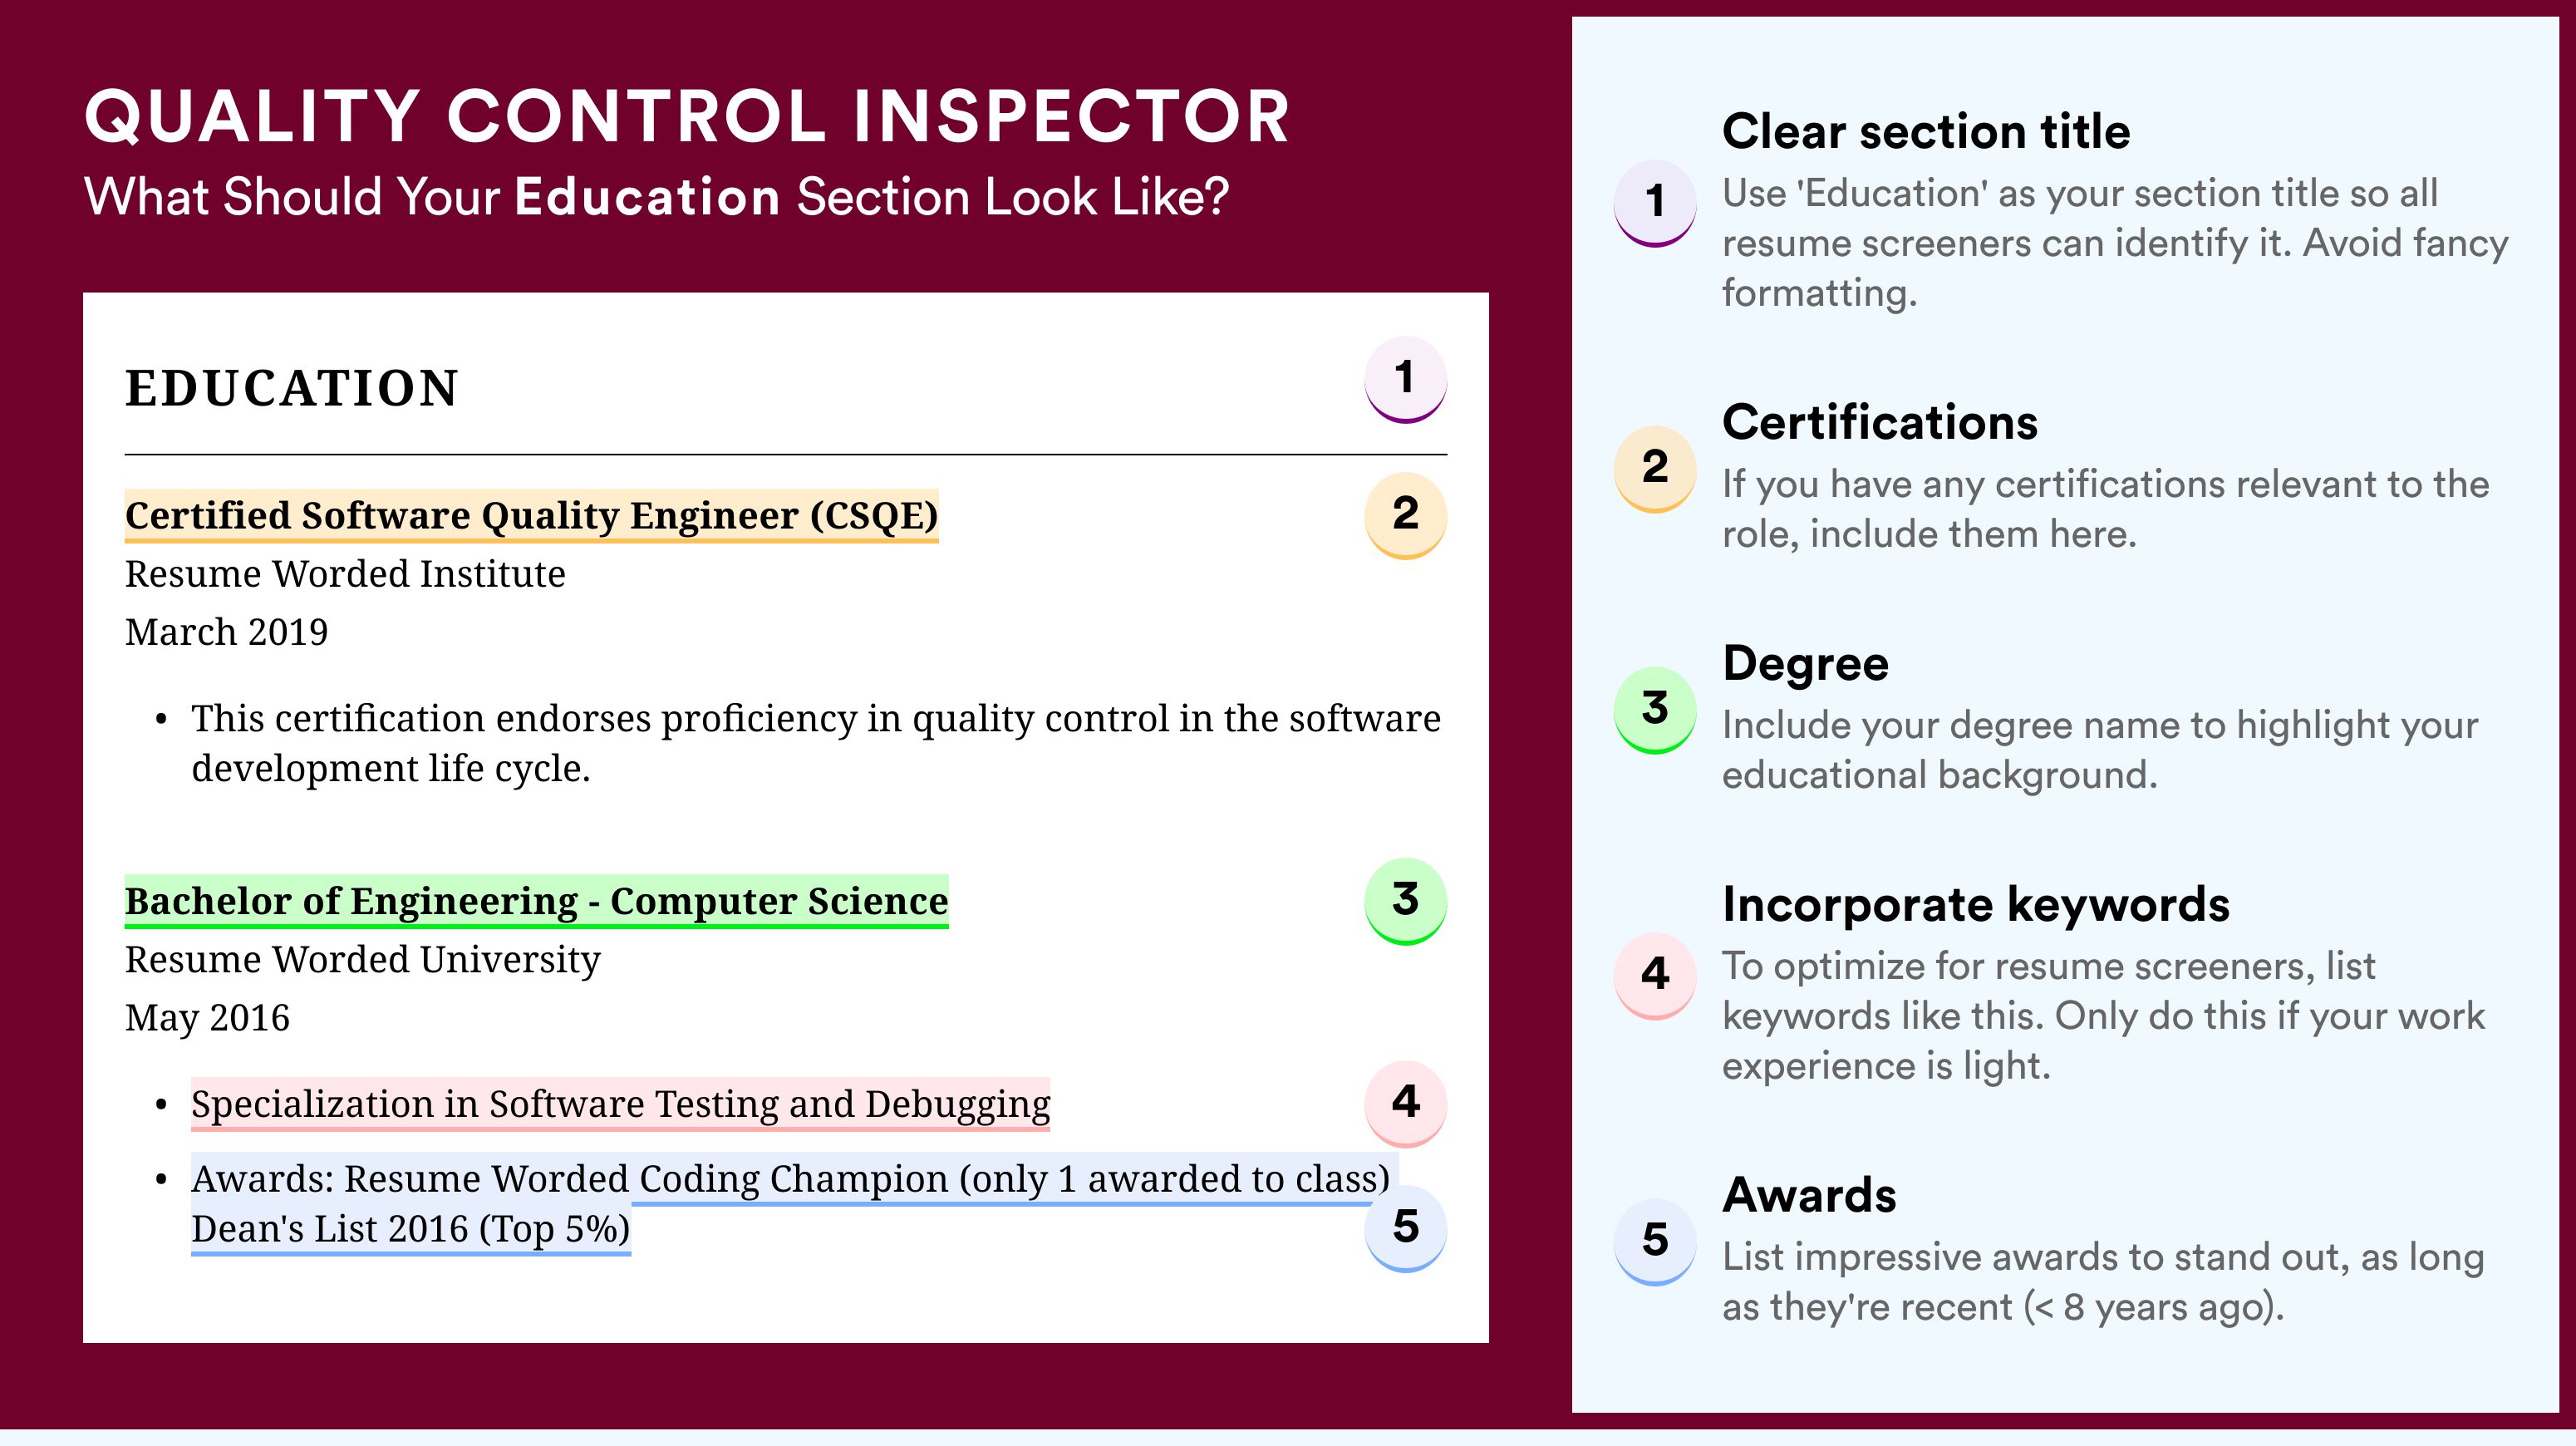 How To Write An Education Section - Quality Control Inspector Roles